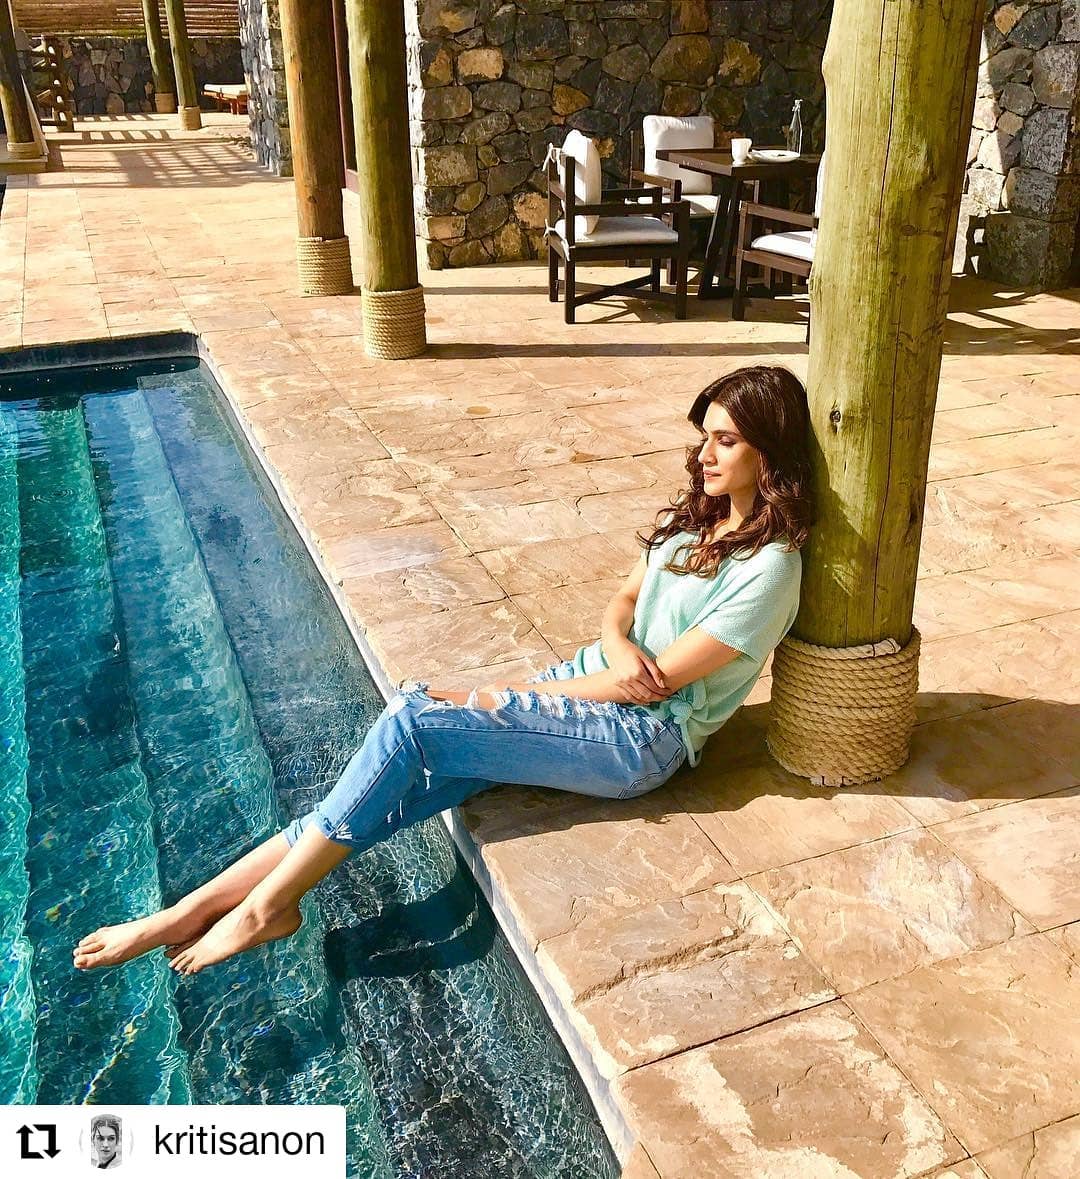 NNNOW - Our #WCW Kriti Sanon is definitely making us dream about that perfect vacay outfit. We love how she's wearing a mint green t-shirt along with distressed denims for that casual yet easy look....